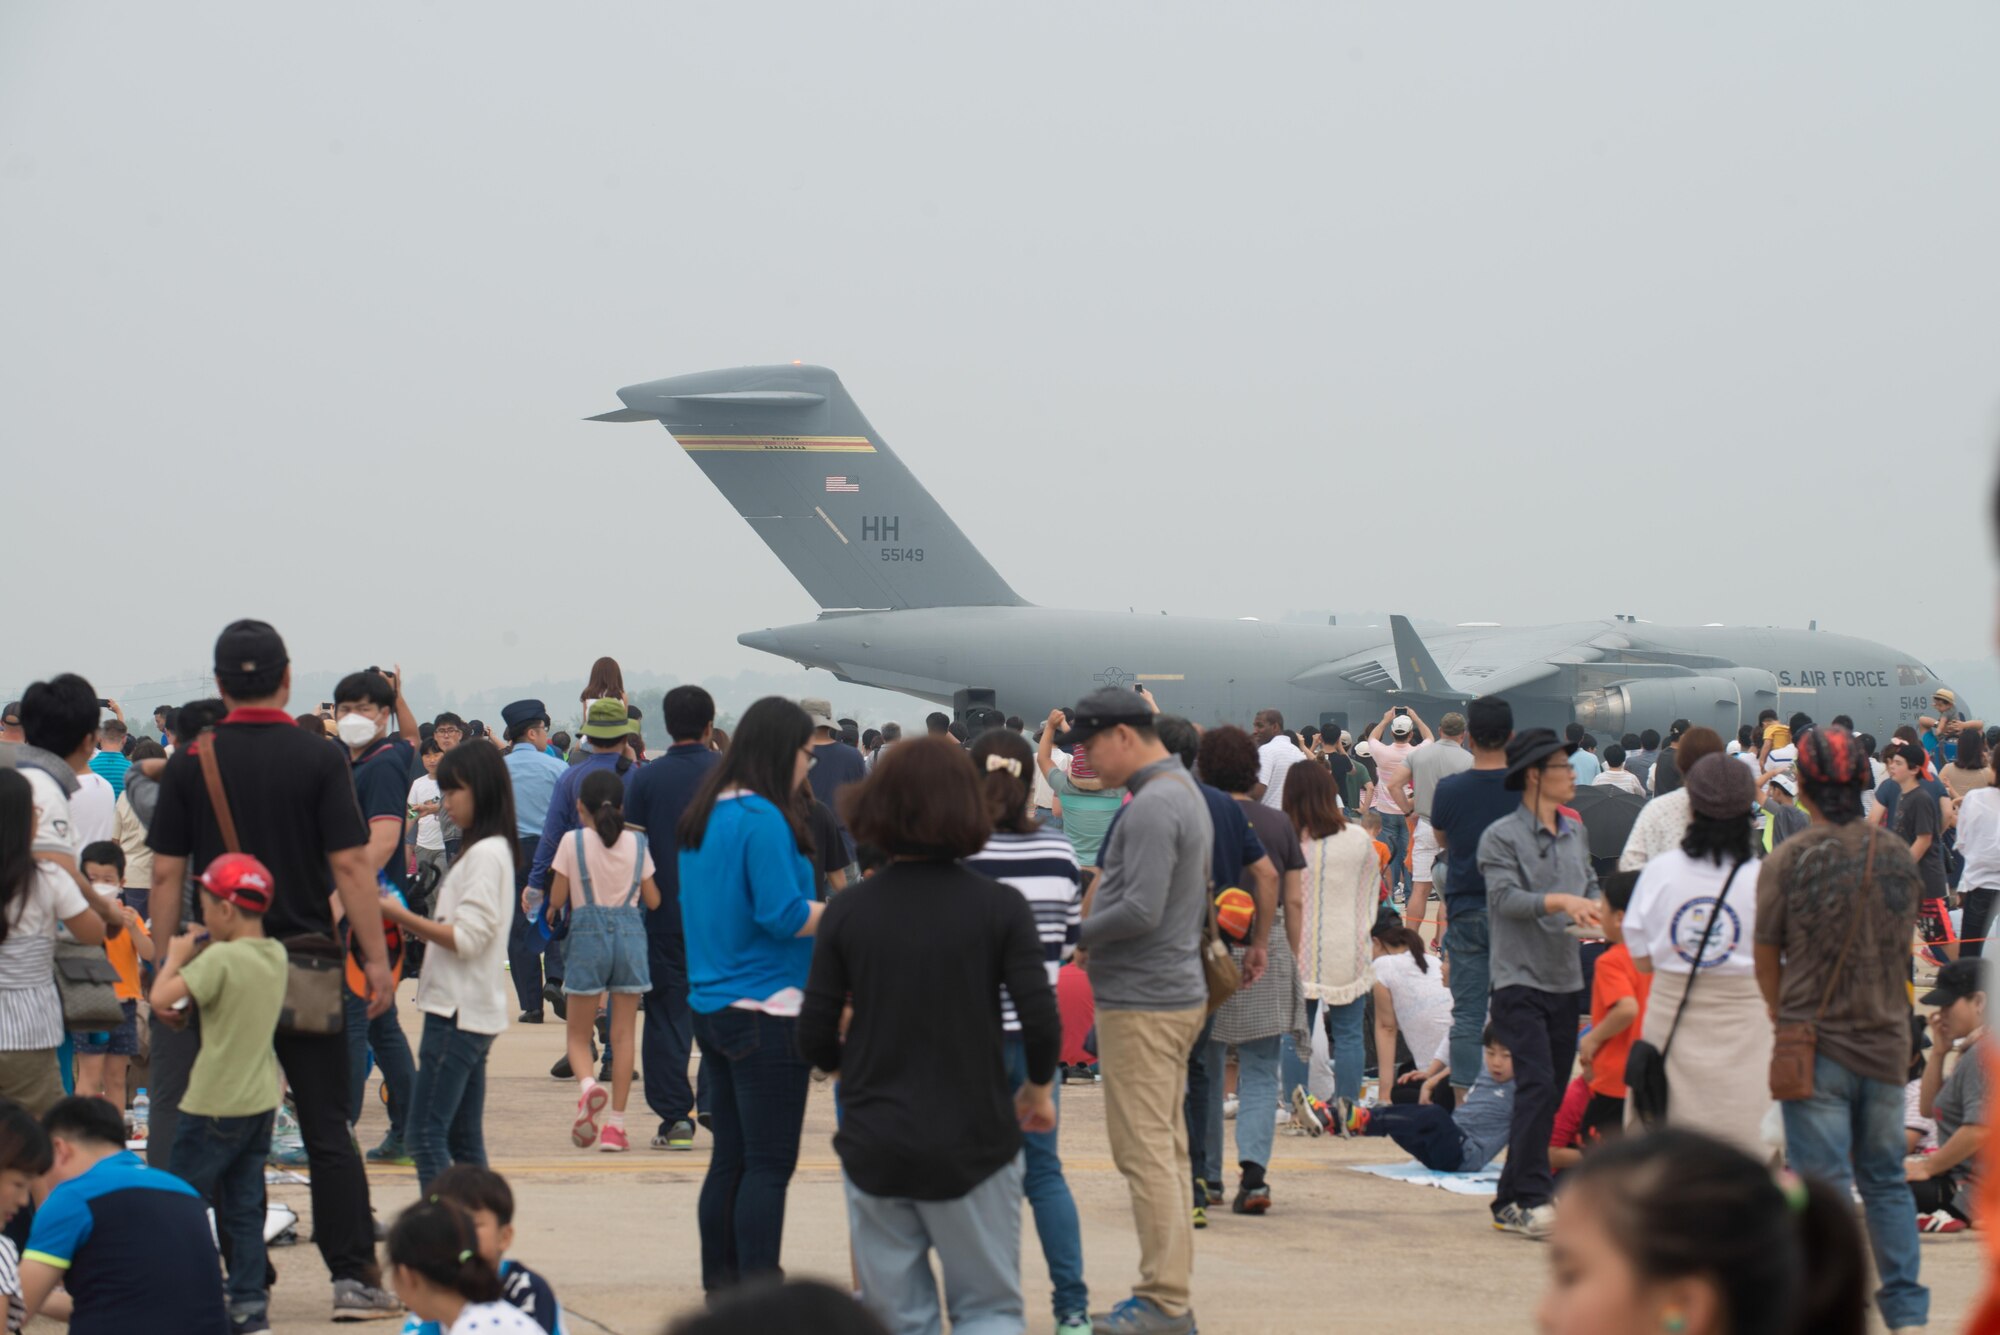 Air show attendees watch as a C-17 Globemaster III taxis in reverse after landing during Air Power Day 2016 at Osan Air Base, Republic of Korea. The C-17 has the capability to deploy personnel and cargo to locations across the world. (U.S. Air Force photo by Senior Airman Dillian Bamman)